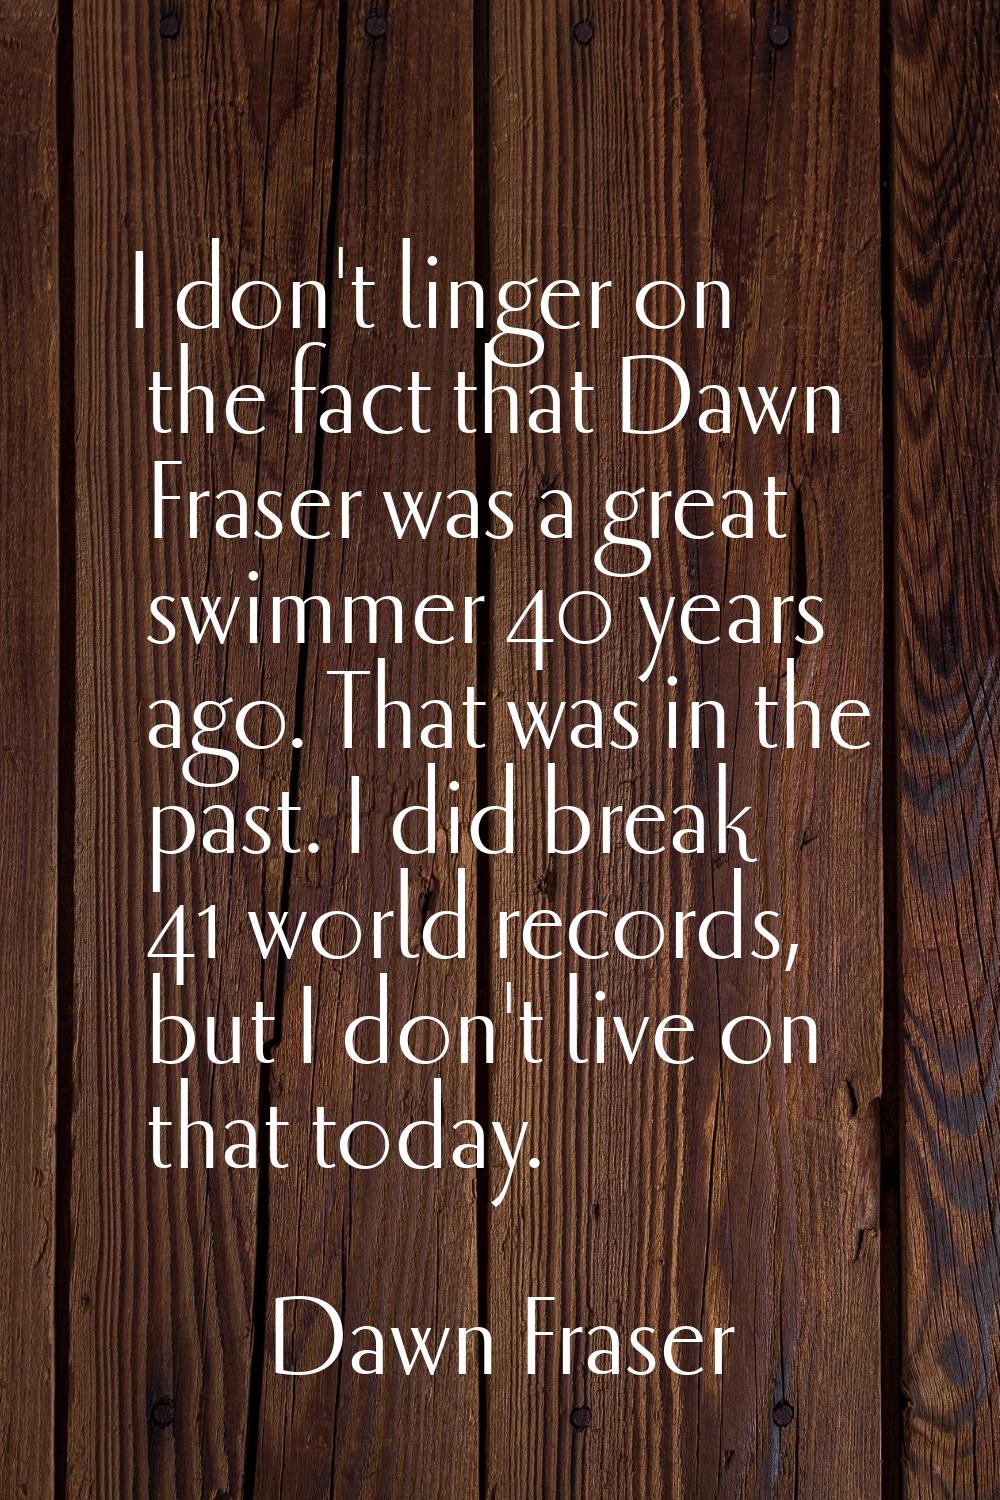 I don't linger on the fact that Dawn Fraser was a great swimmer 40 years ago. That was in the past.